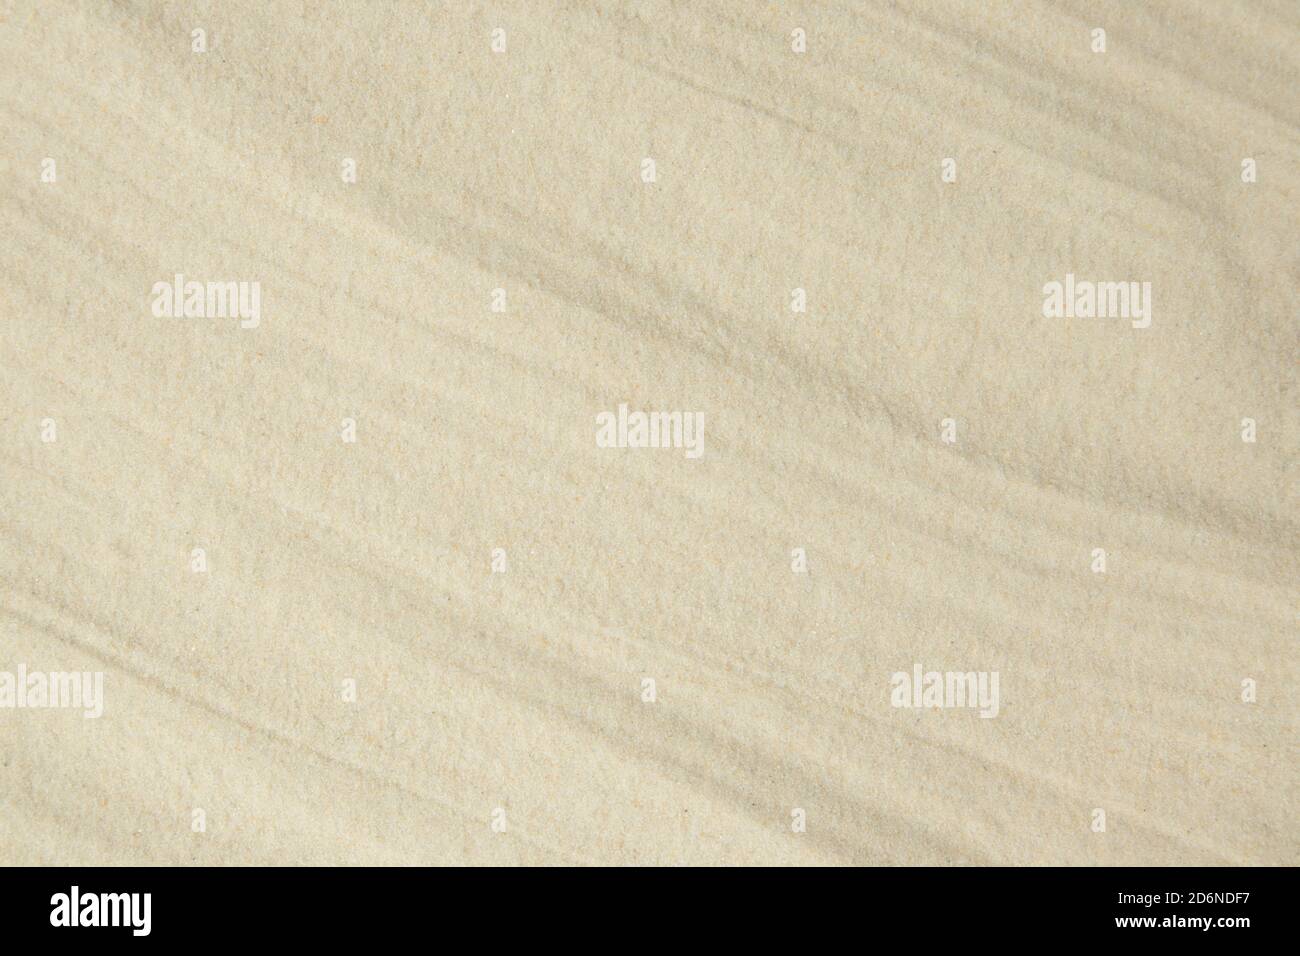 A background of fine quartz sand, laid with soft waves. Template. Stock Photo